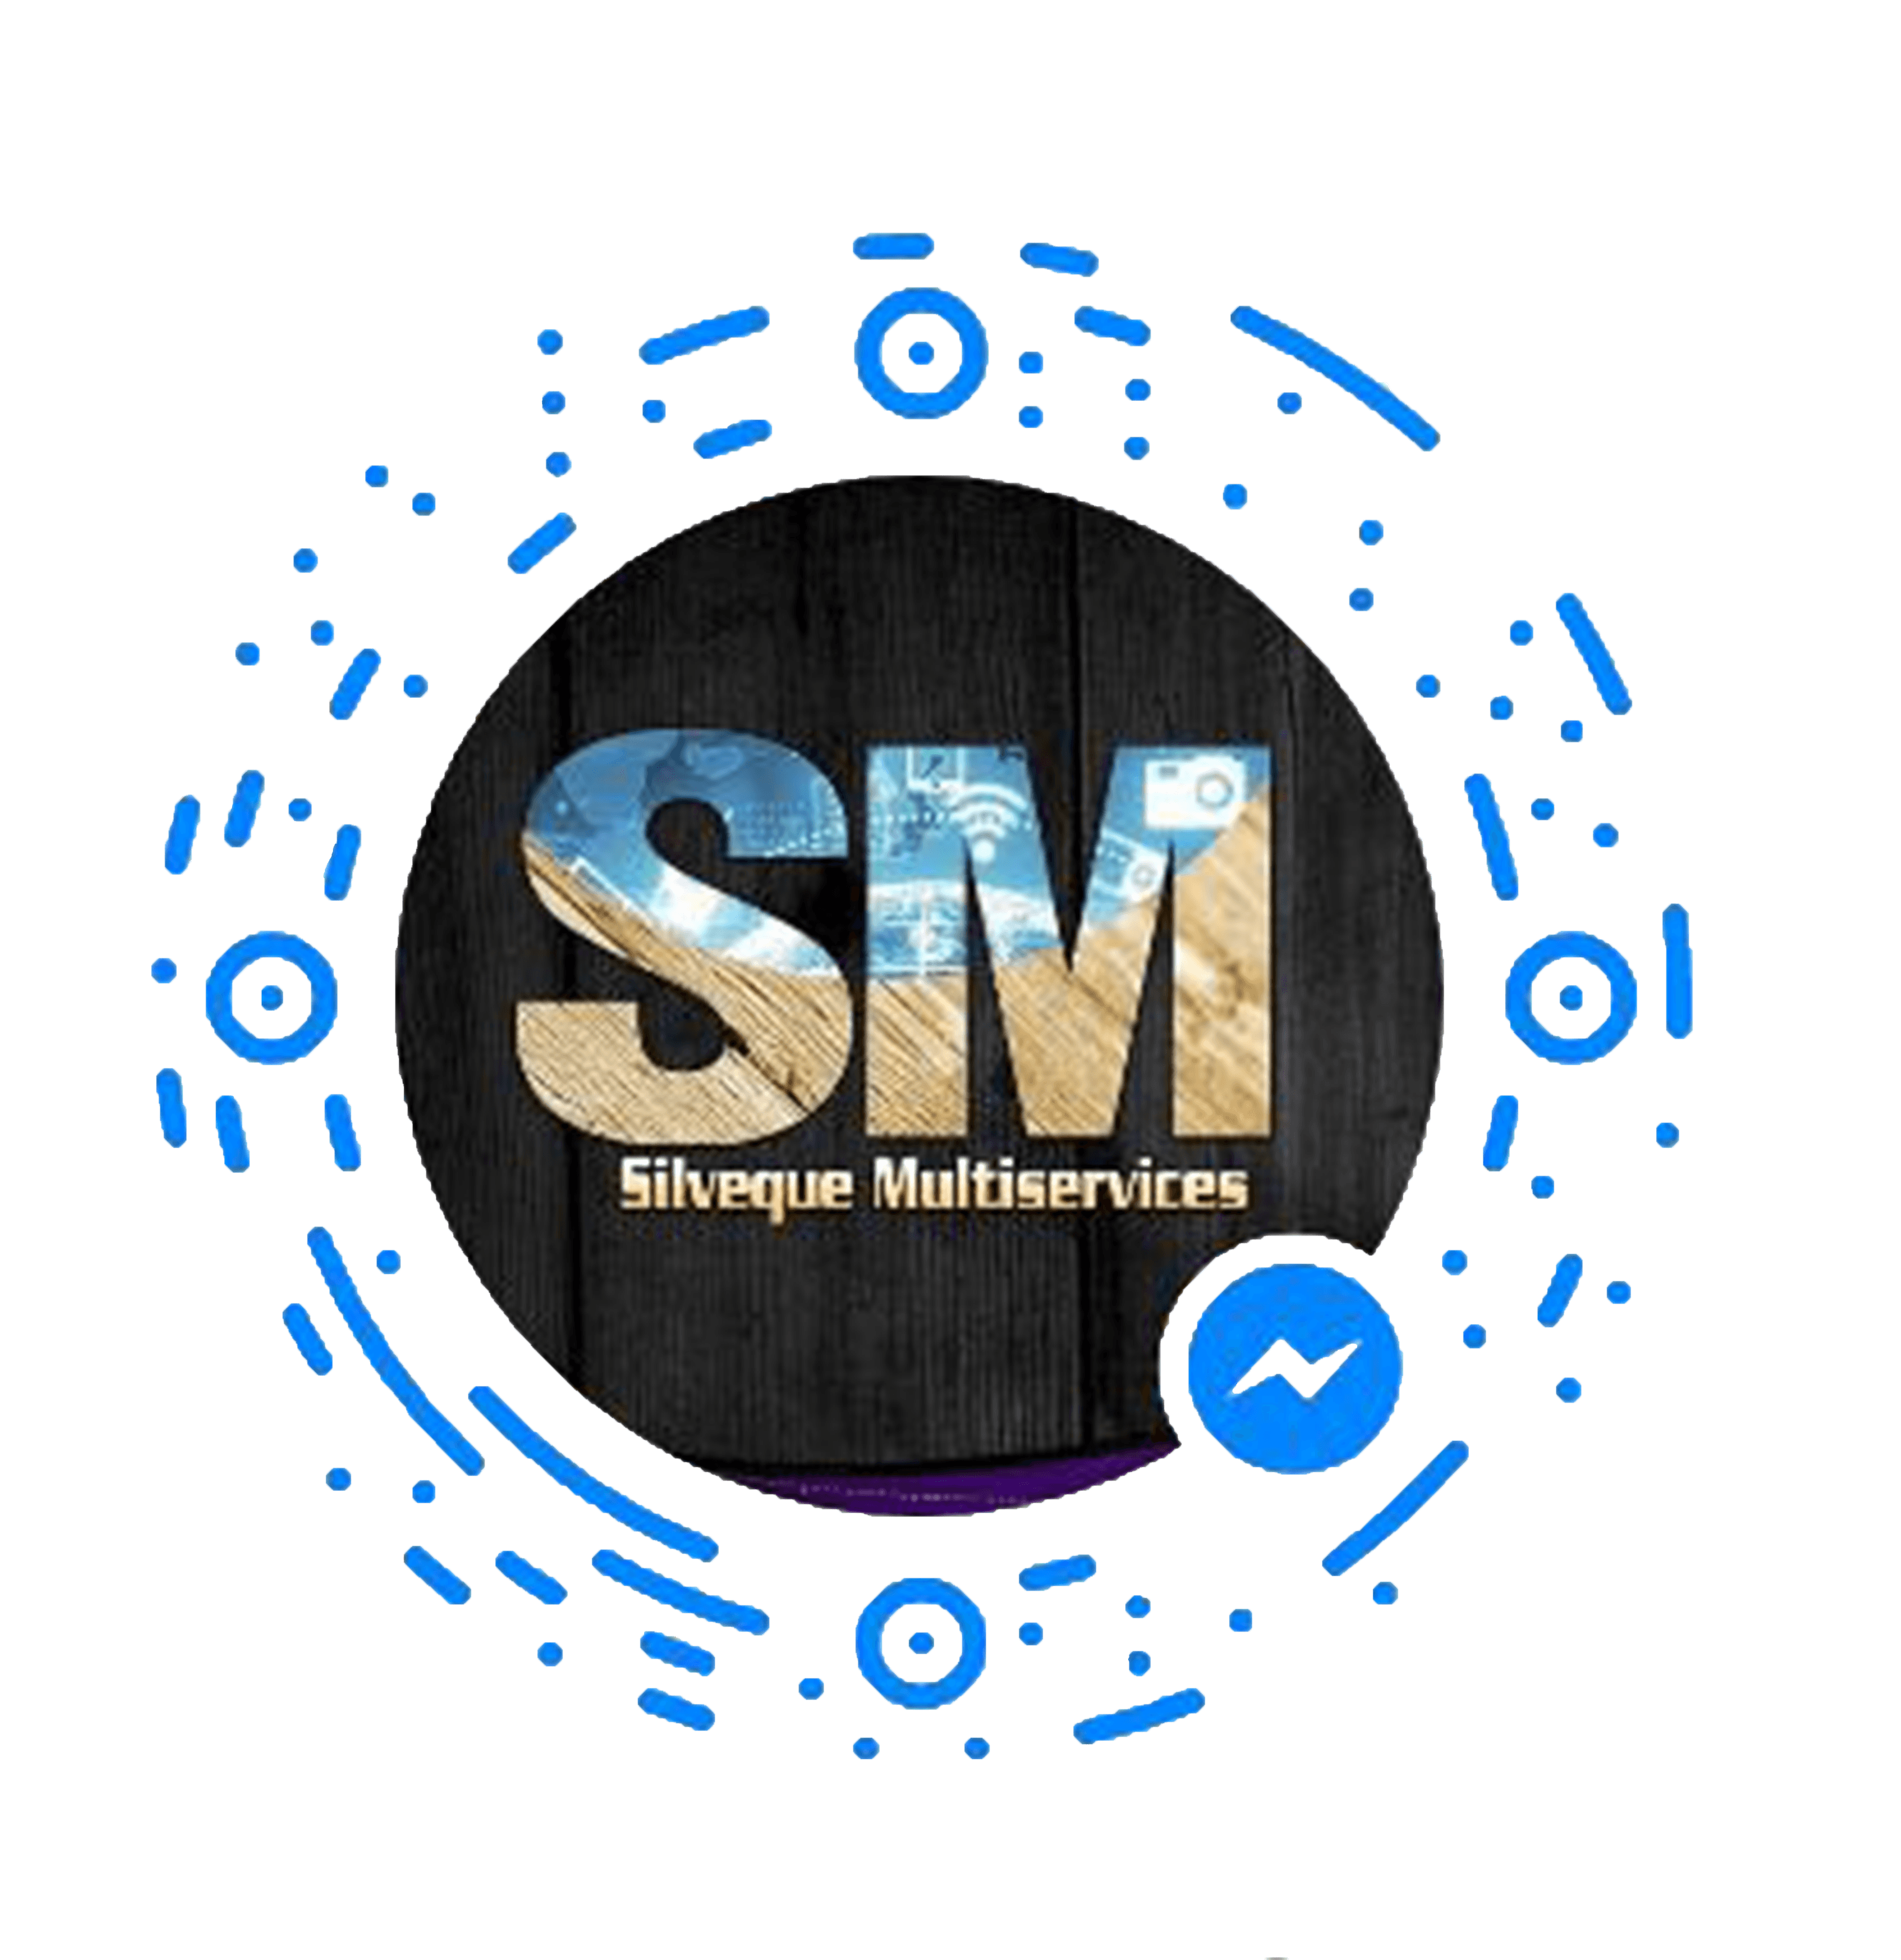 Silveque Multiservices